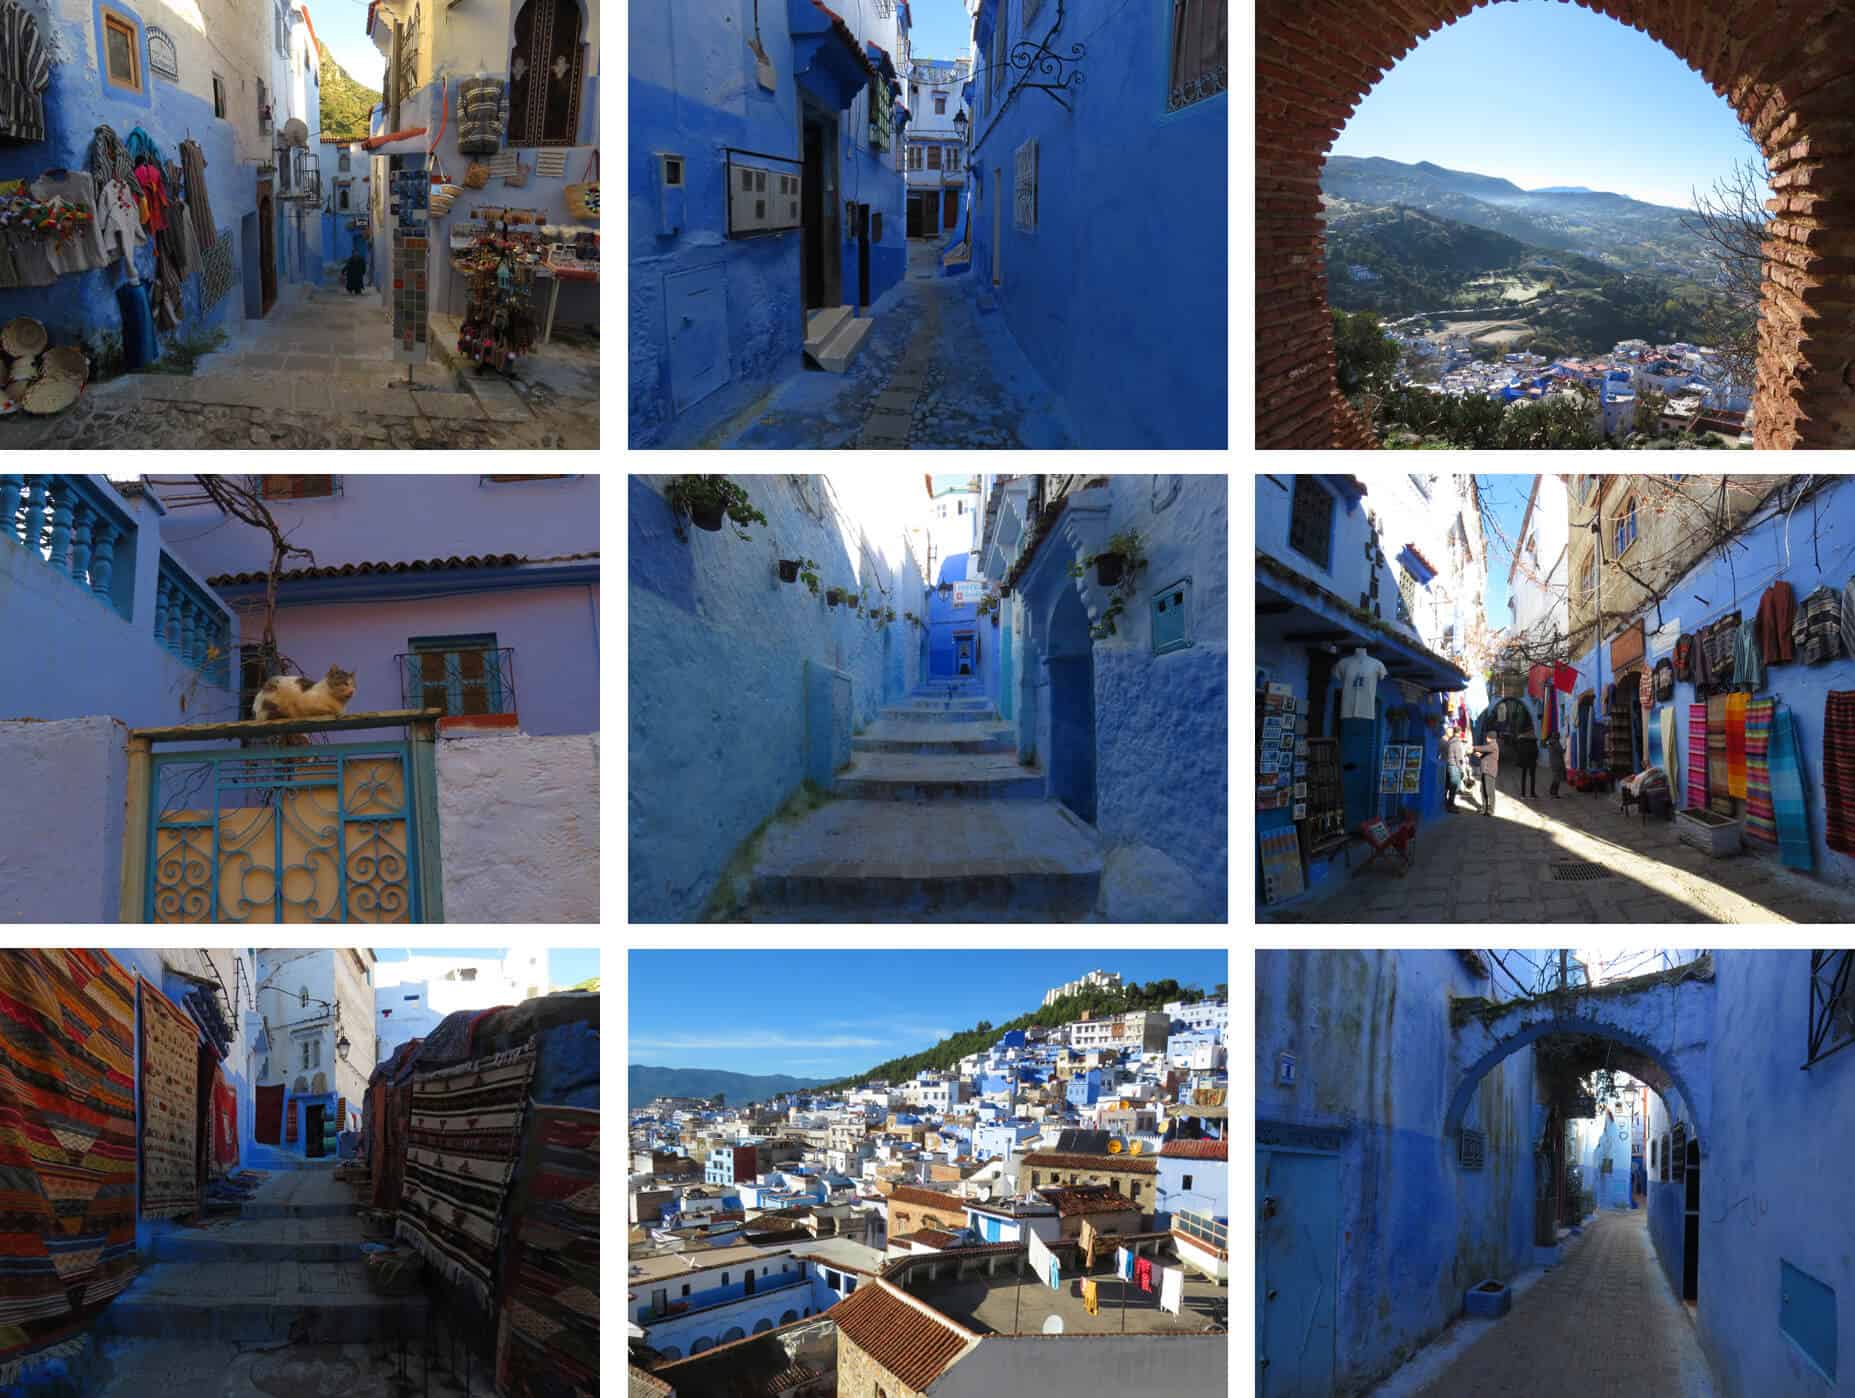 images of Chefchaouen, Morocco's blue city